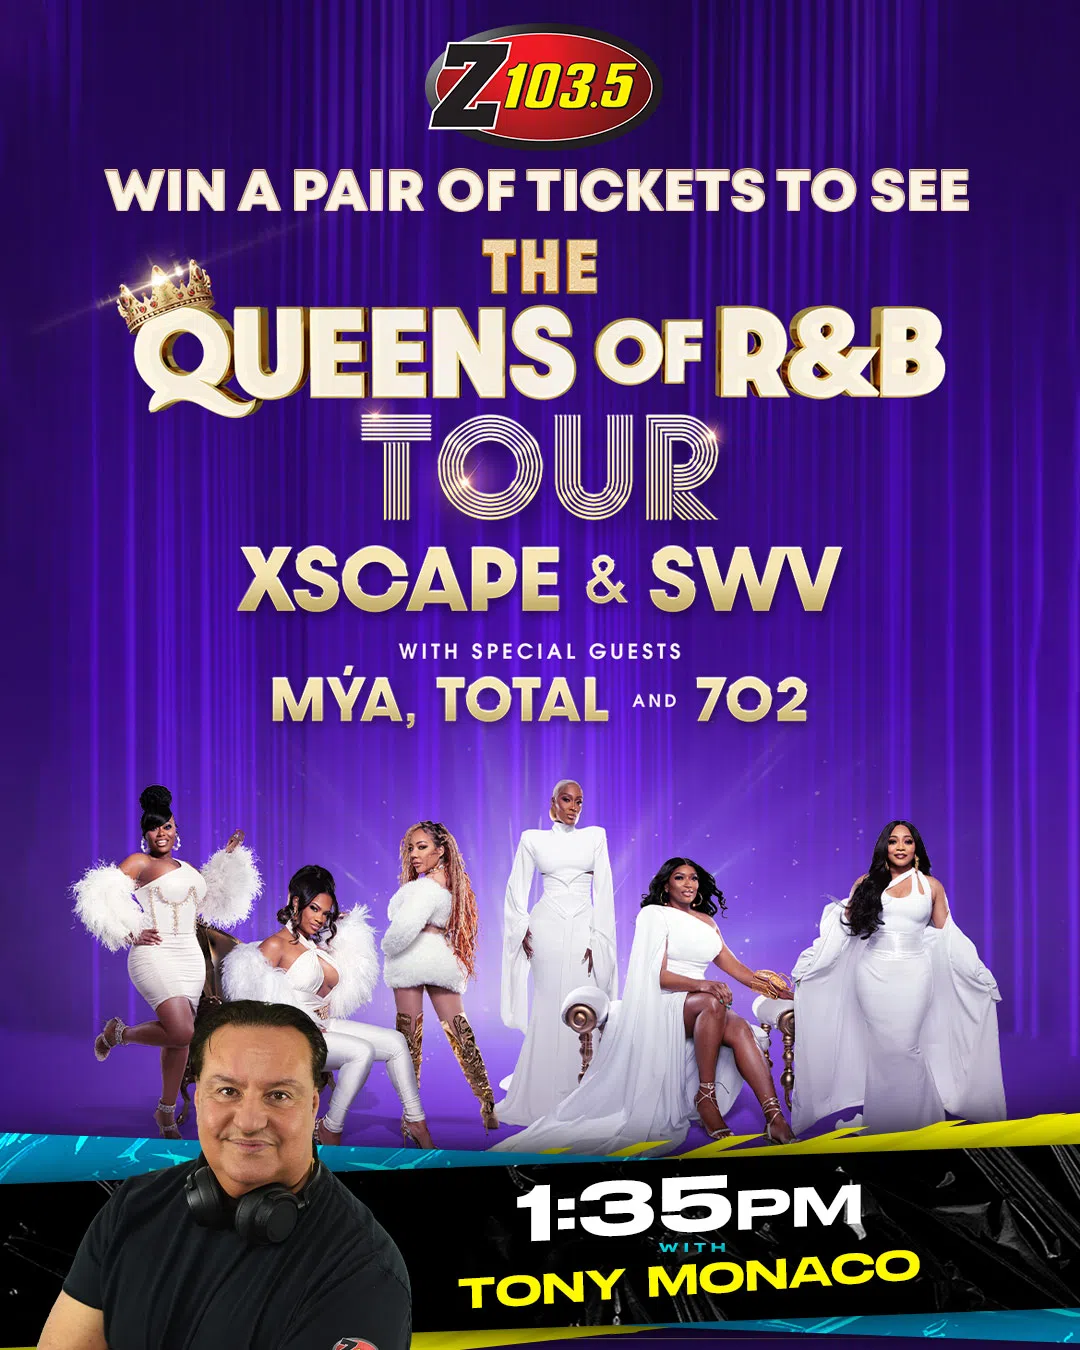 Feature: https://z1035.com/win/win-tickets-to-see-the-queens-of-rb-xscape-and-swv/